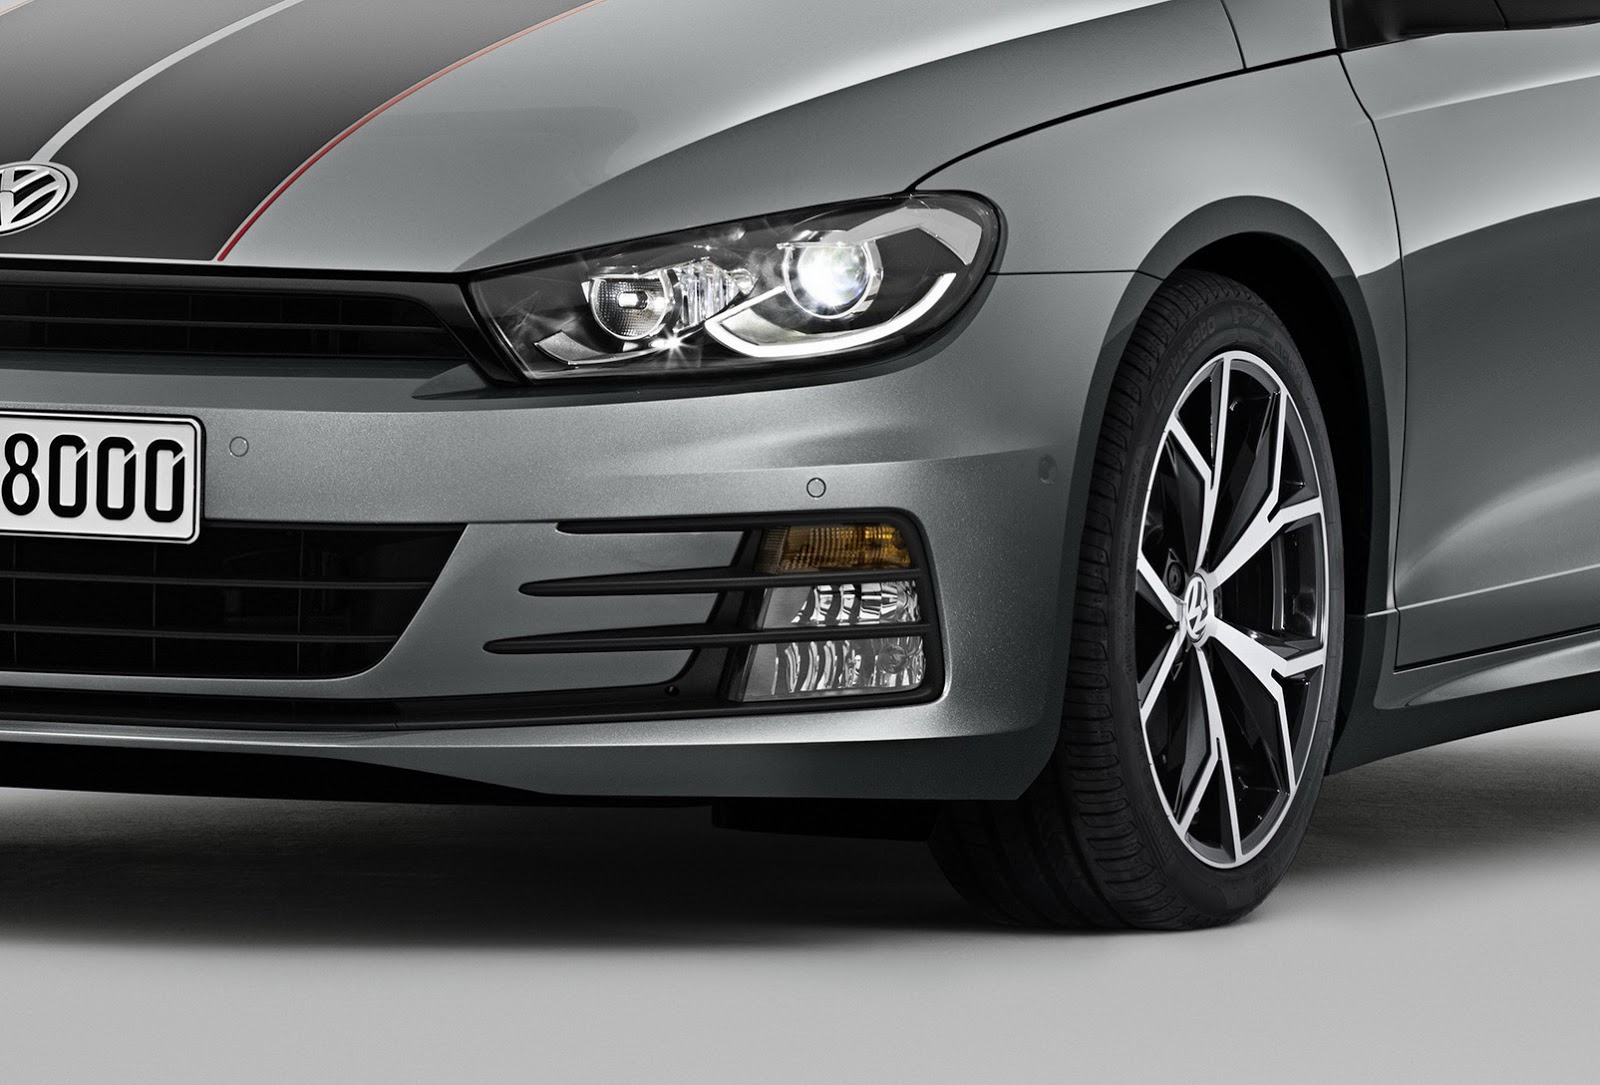 New 2015 VW Scirocco GTS To Debut In Shanghai